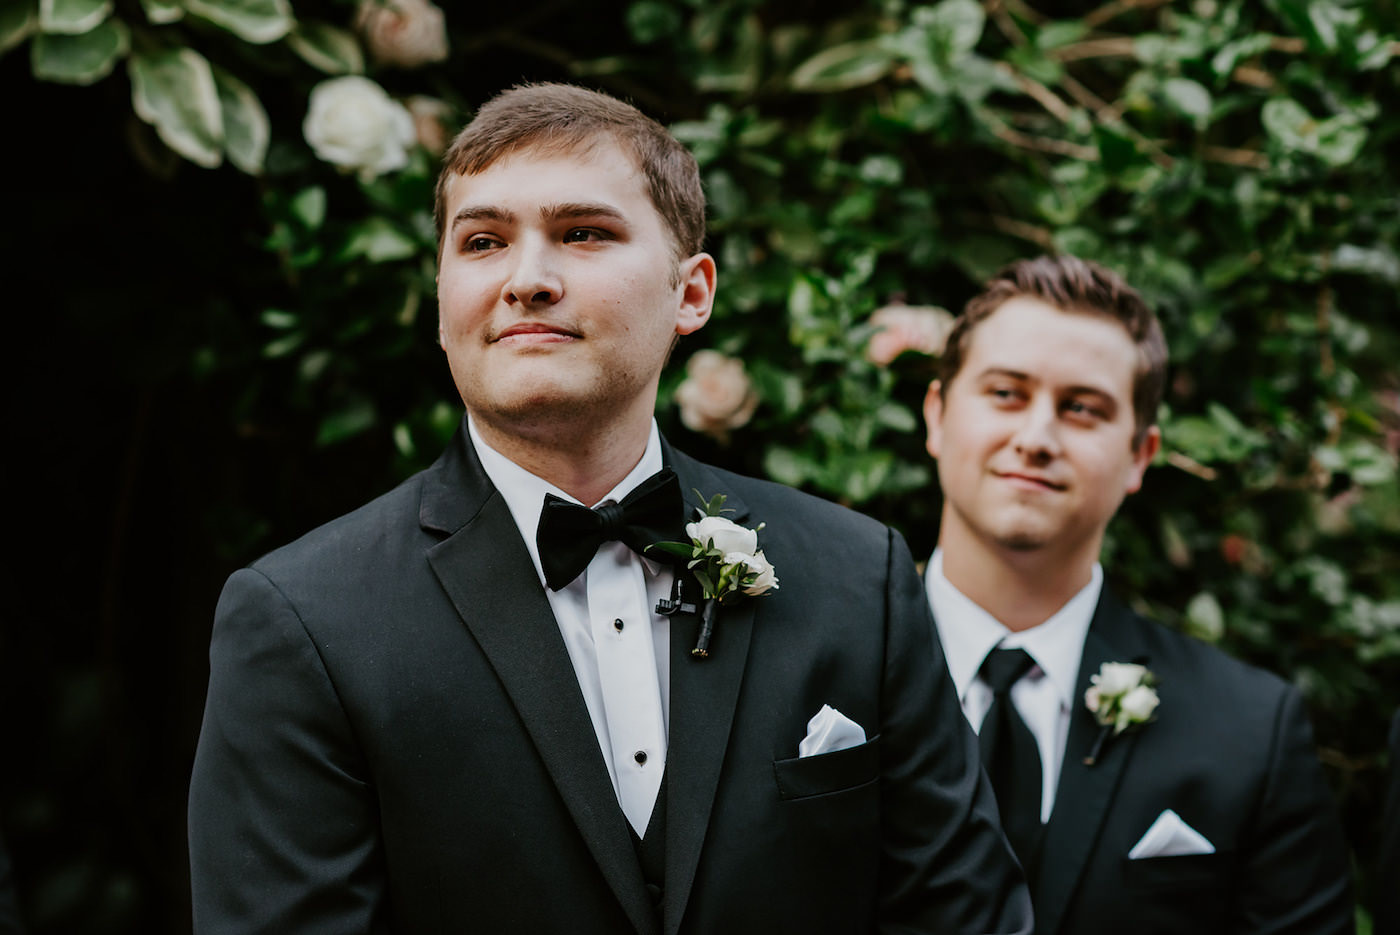 Groom in Classic Black Tuxedo Suit with Bow Tie and White Rose Boutonniere | Groom Seeing His Bride For The First Time During Wedding Ceremony